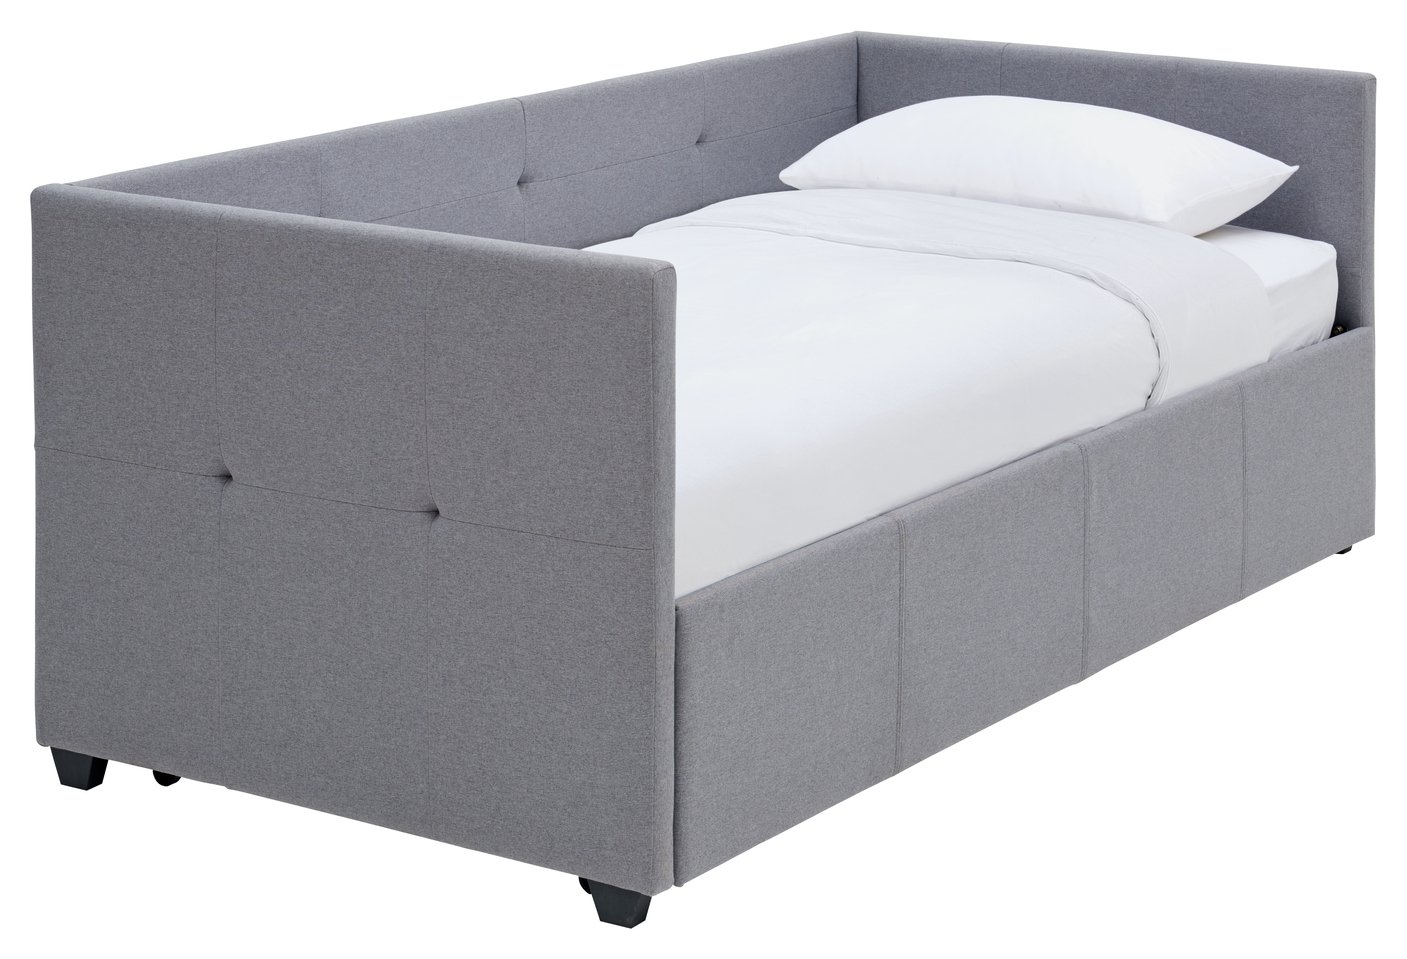 Argos Home Tamara Day Bed with Trundle & 2 Mattresses review